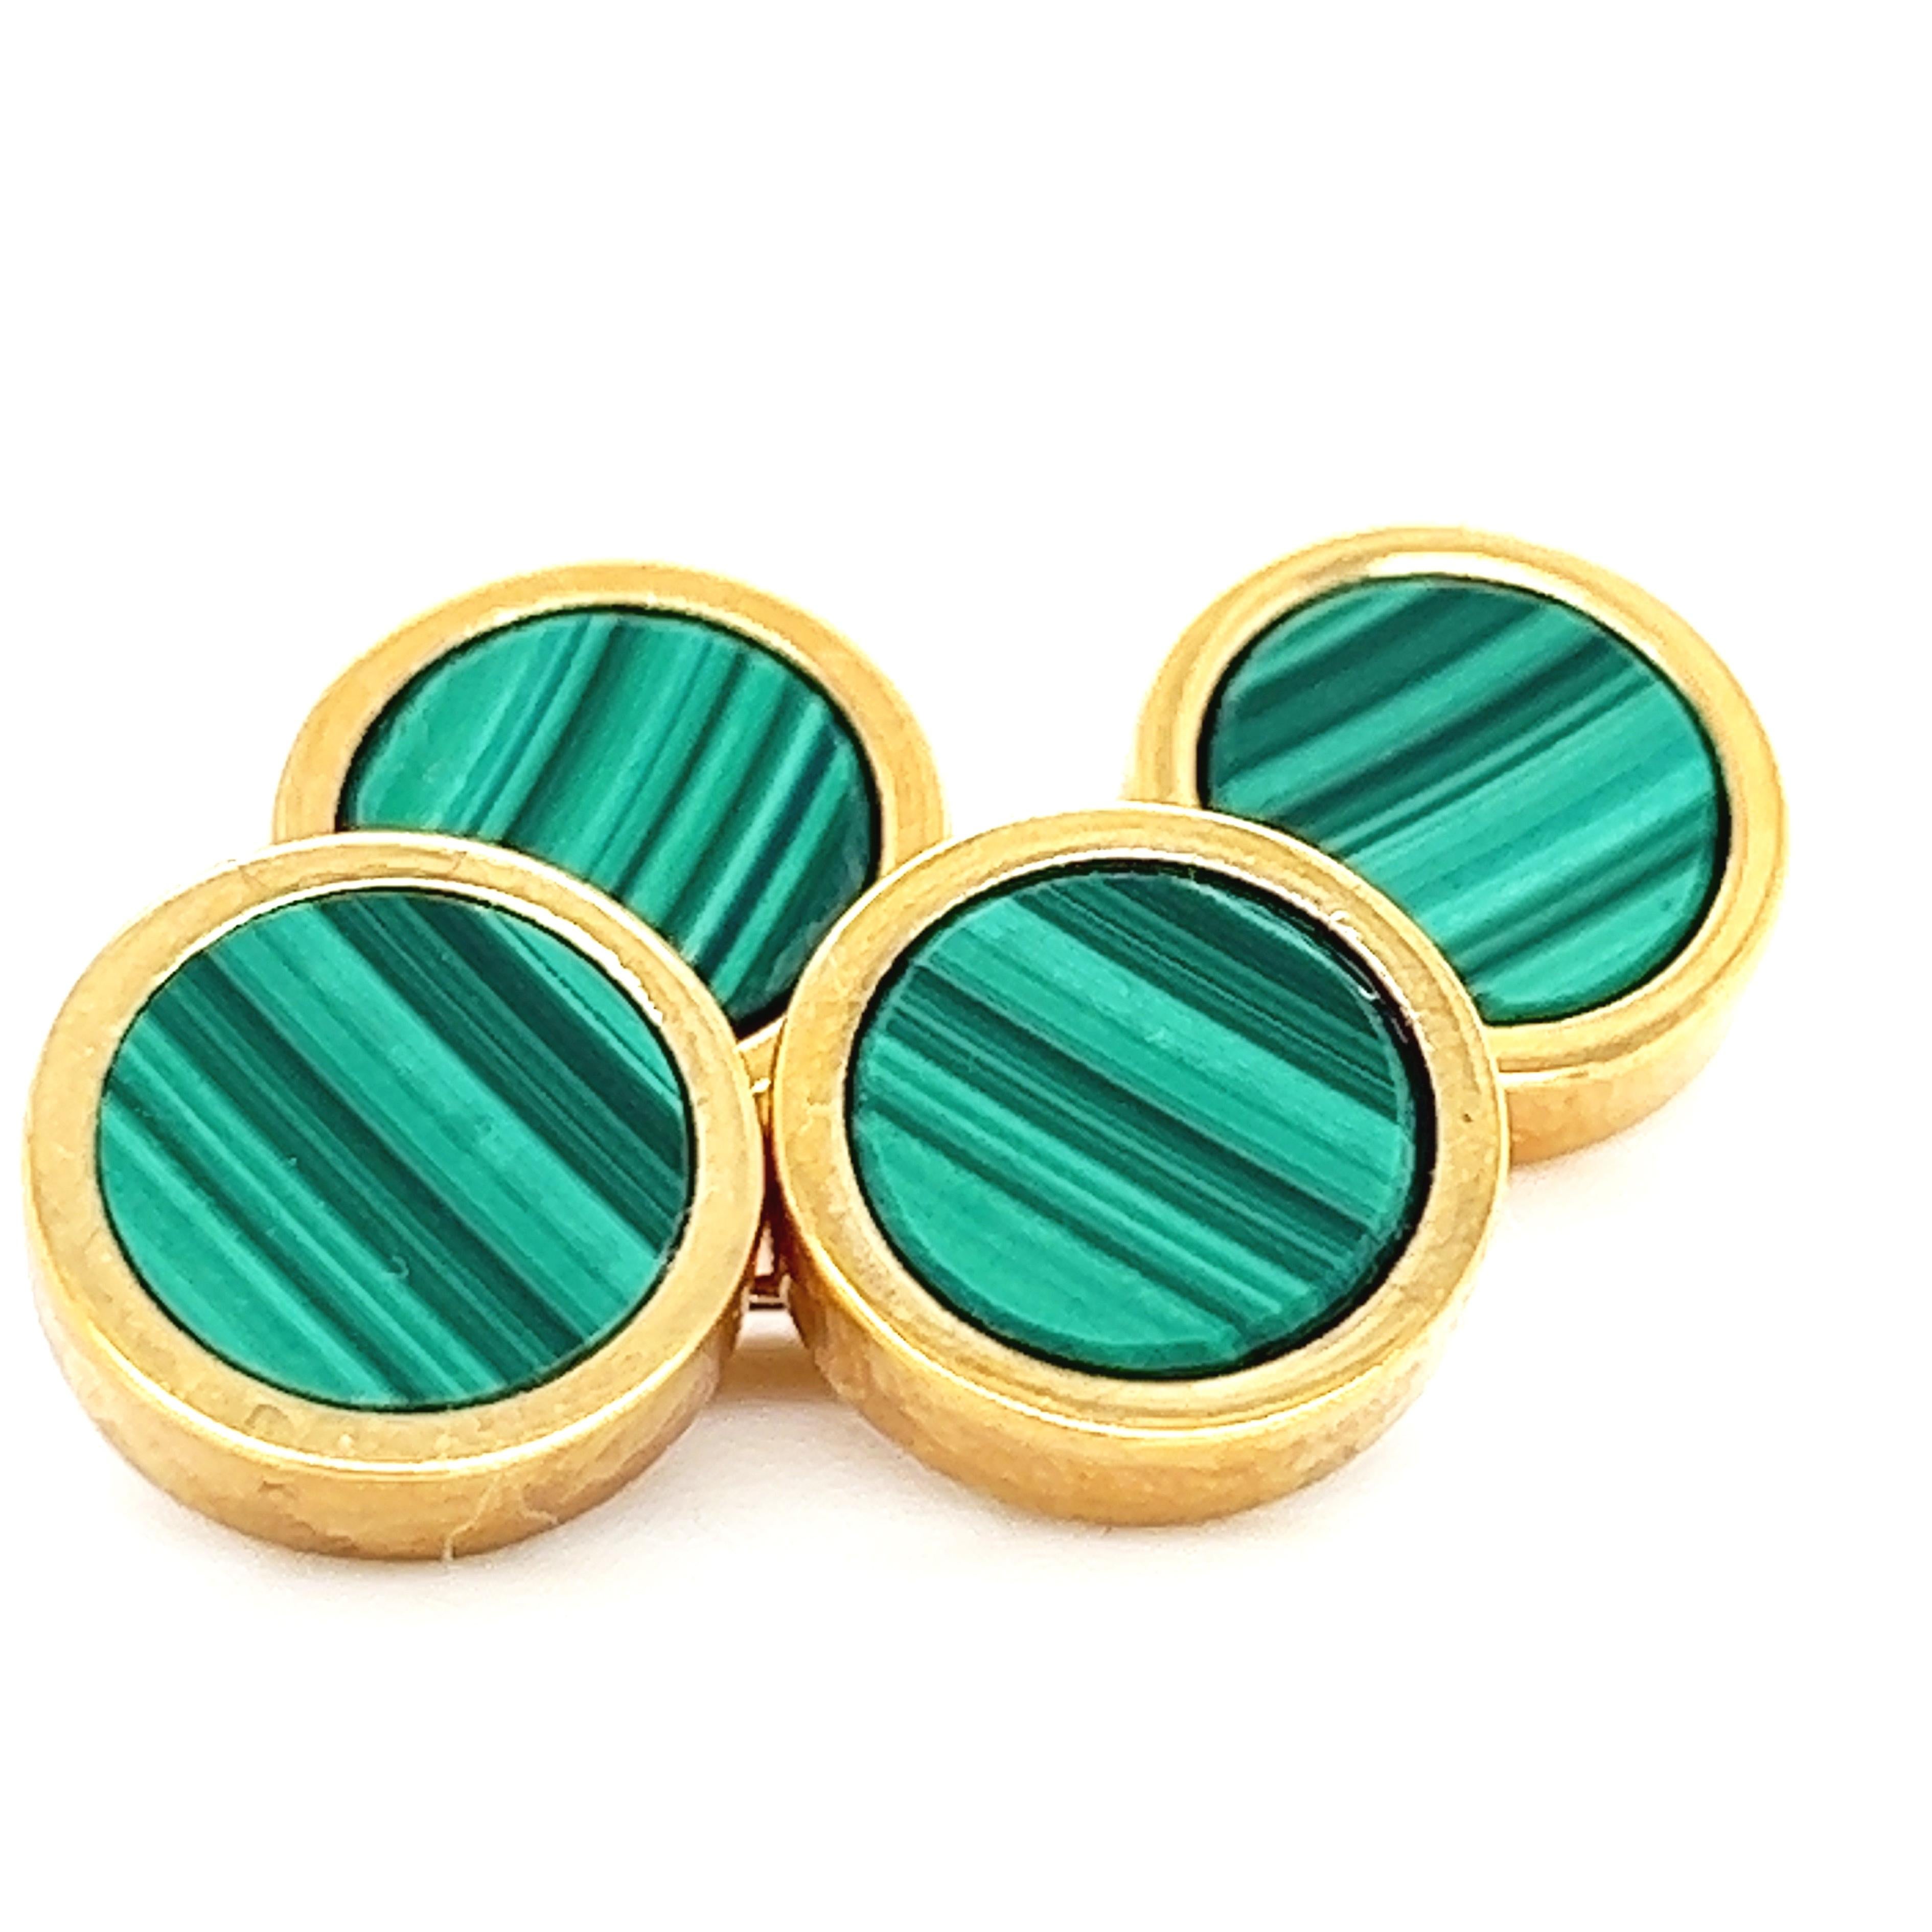 Chic and Timeless, Natural Hand Inlaid Natural Malachite Disk Round Shaped Sterling Silver Cufflinks.
In our smart fitted Tobacco Suede Leather Case and Pouch.

